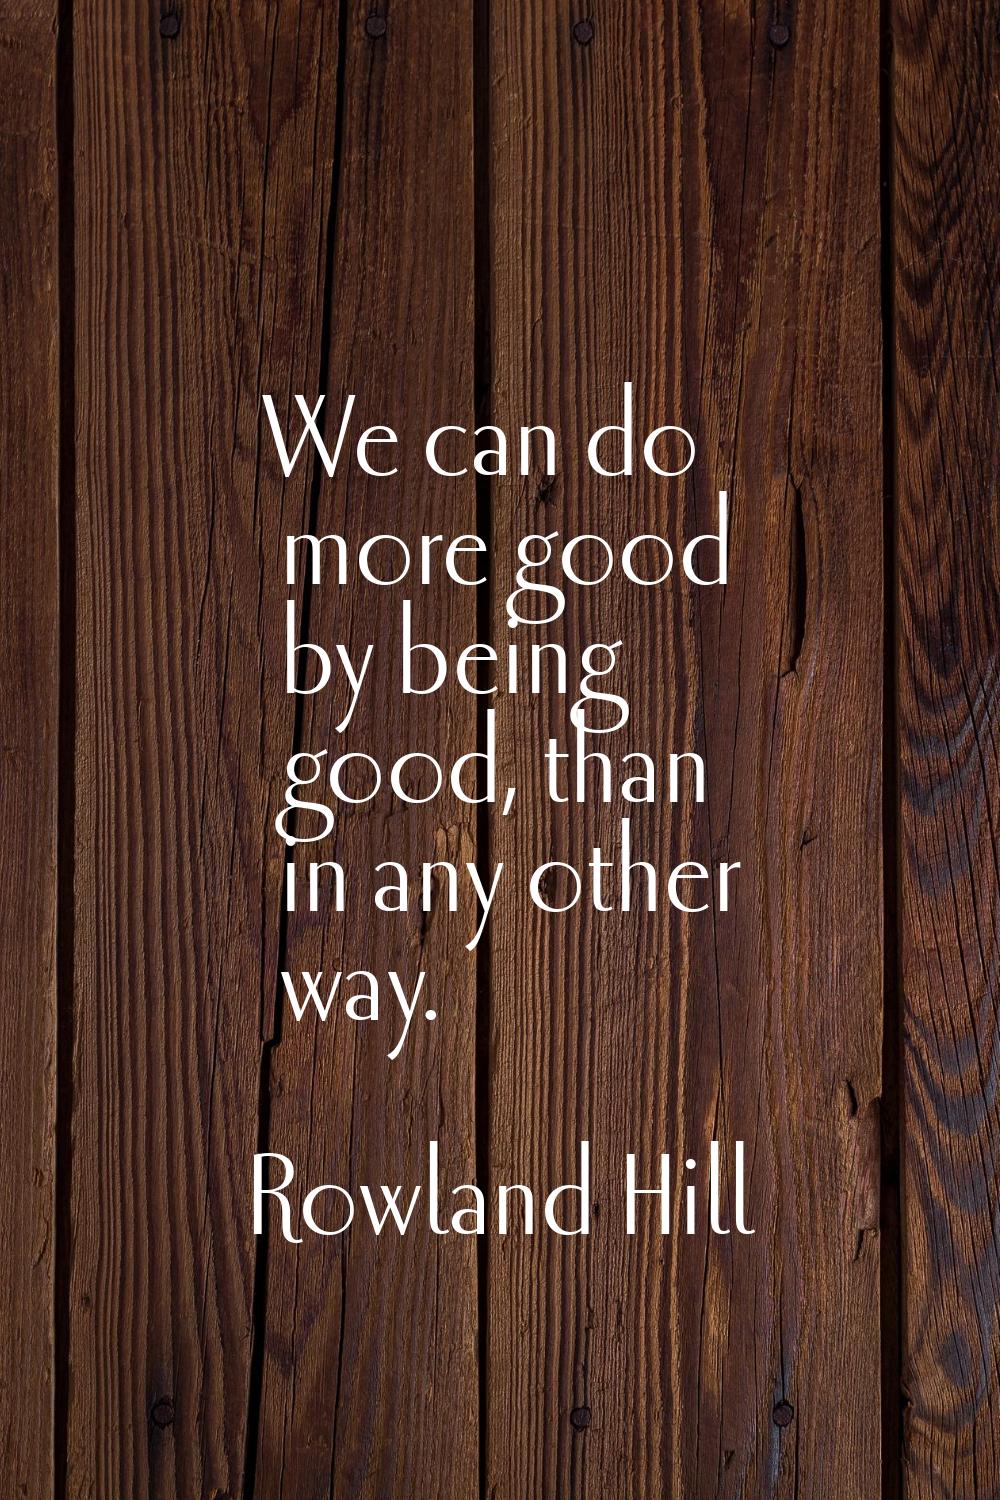 We can do more good by being good, than in any other way.